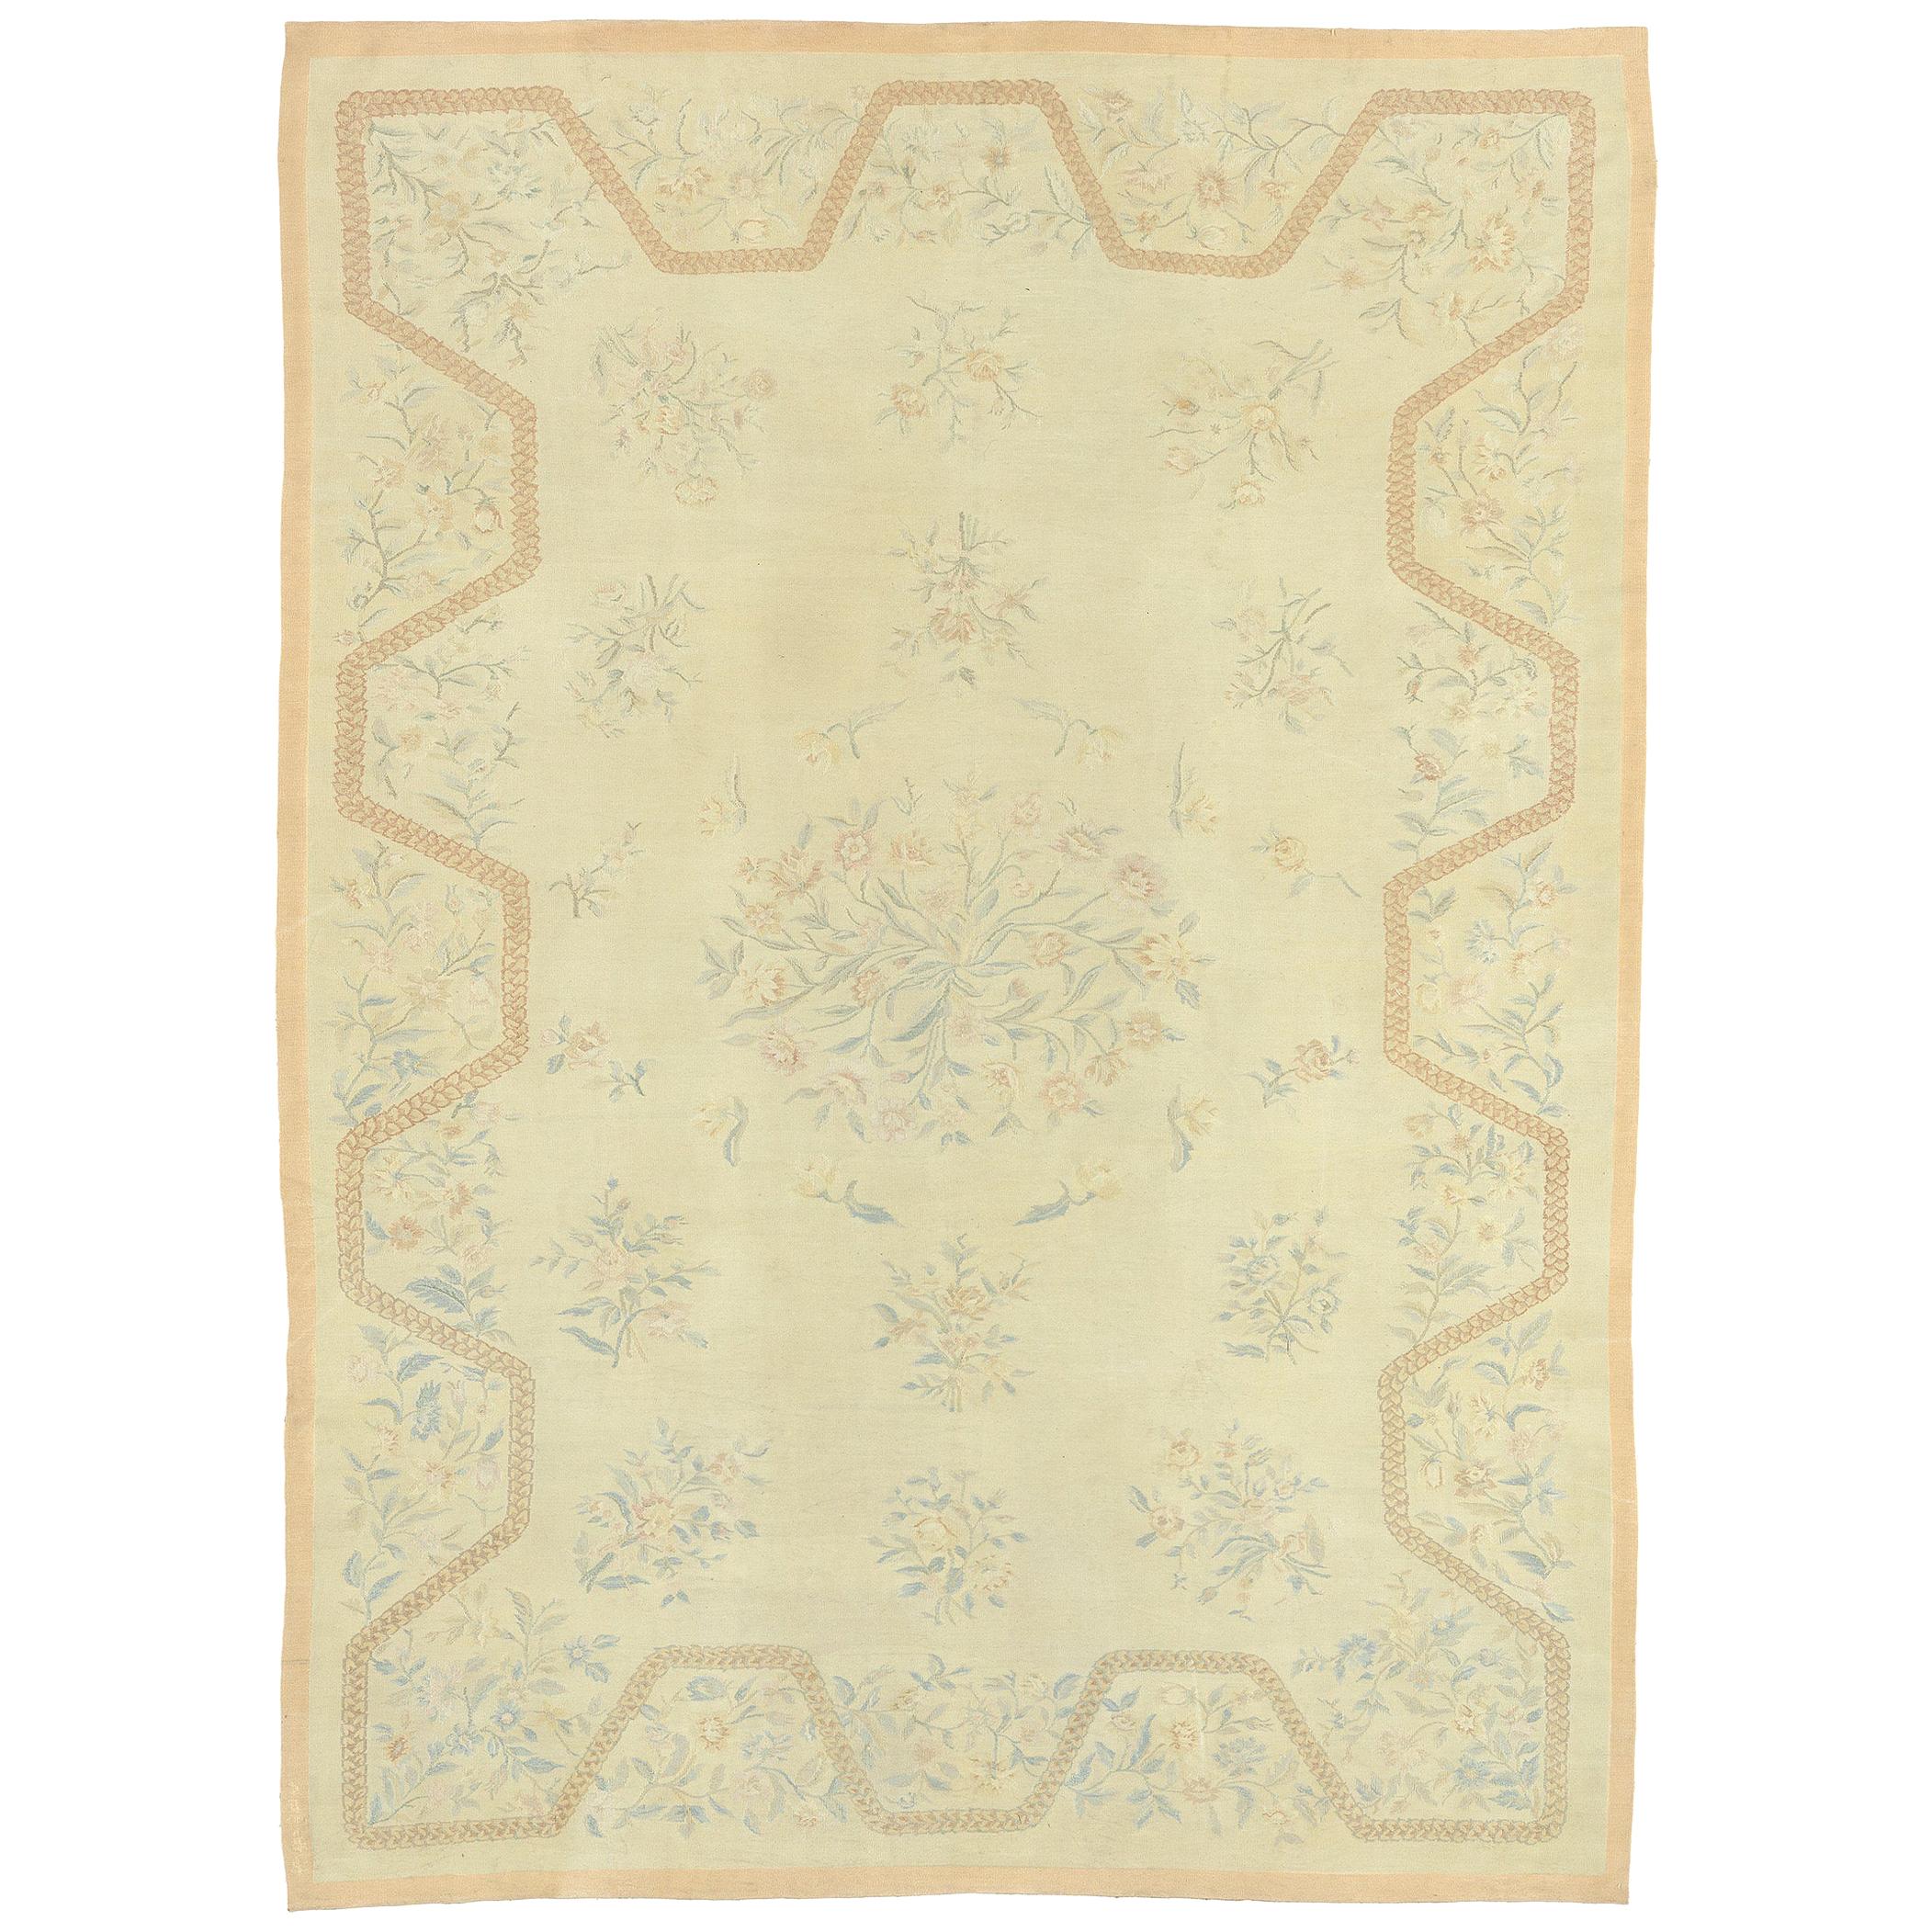 Early 20th Century French Aubusson Rug